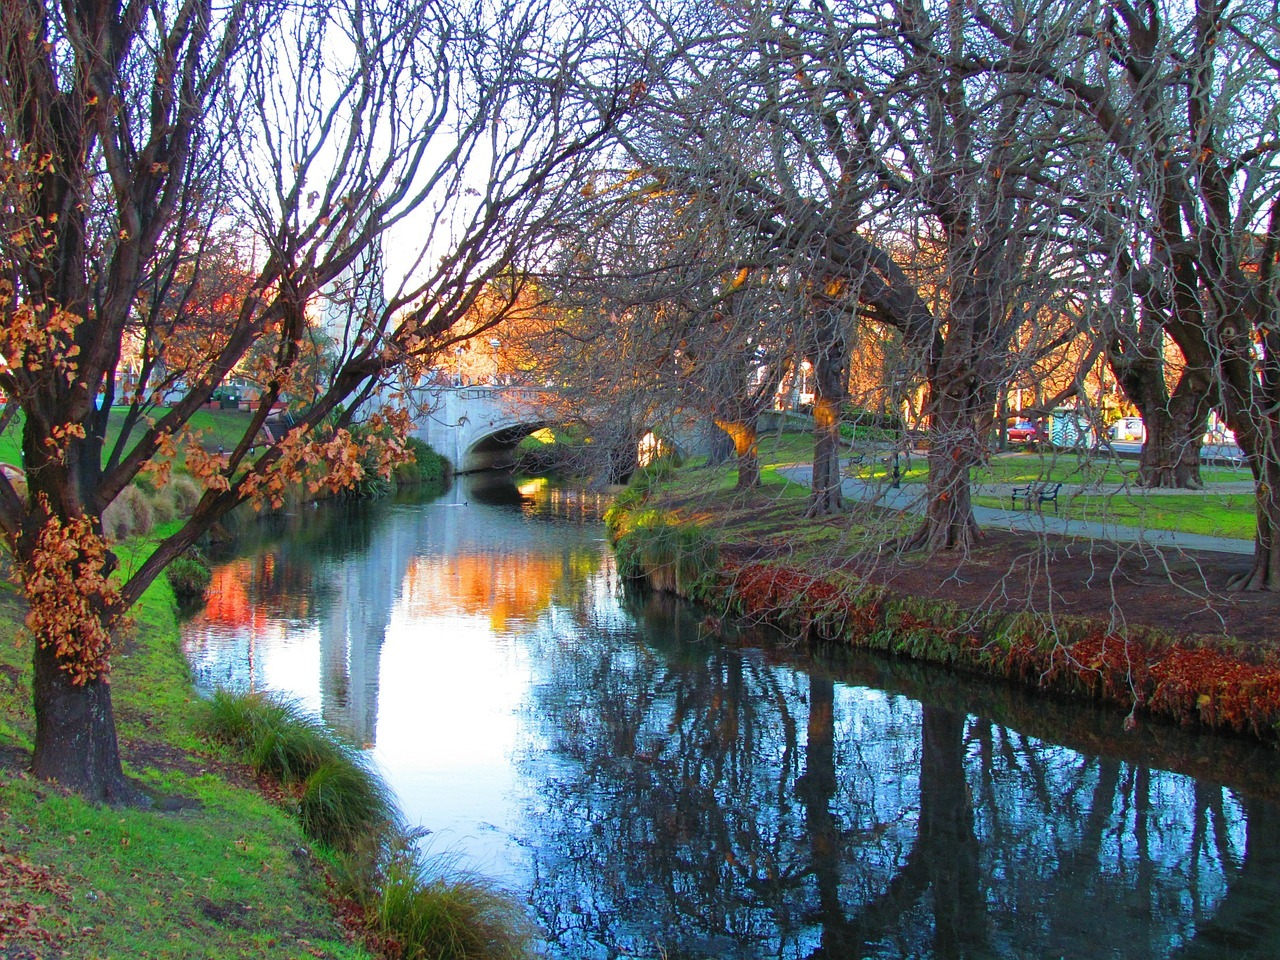 10 Awesome Things To Do In Christchurch | Art, Food, Wine, History, And Culture!